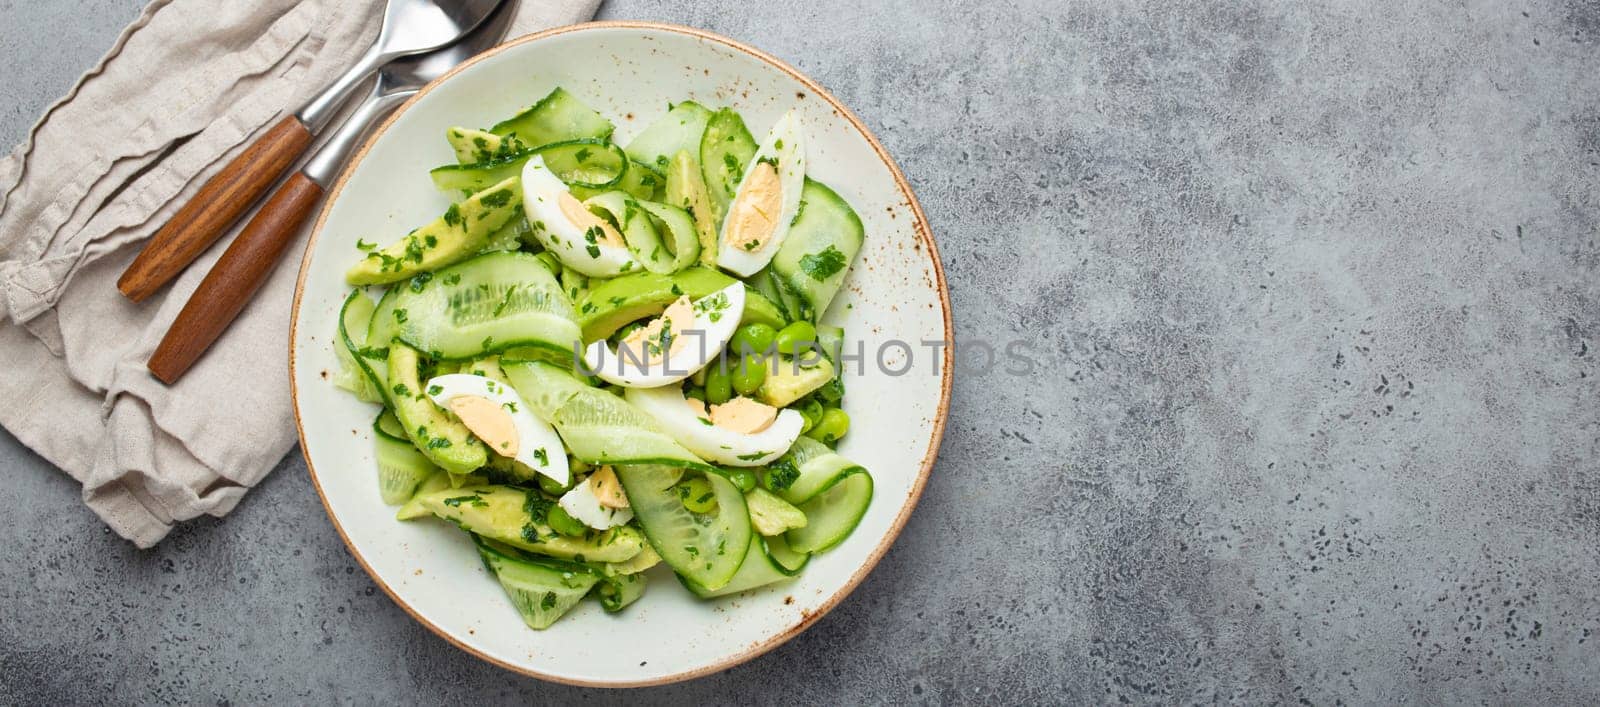 Healthy green avocado salad bowl with boiled eggs, sliced cucumbers, edamame beans, olive oil and herbs on ceramic plate top view, grey stone rustic table background. Copy space by its_al_dente